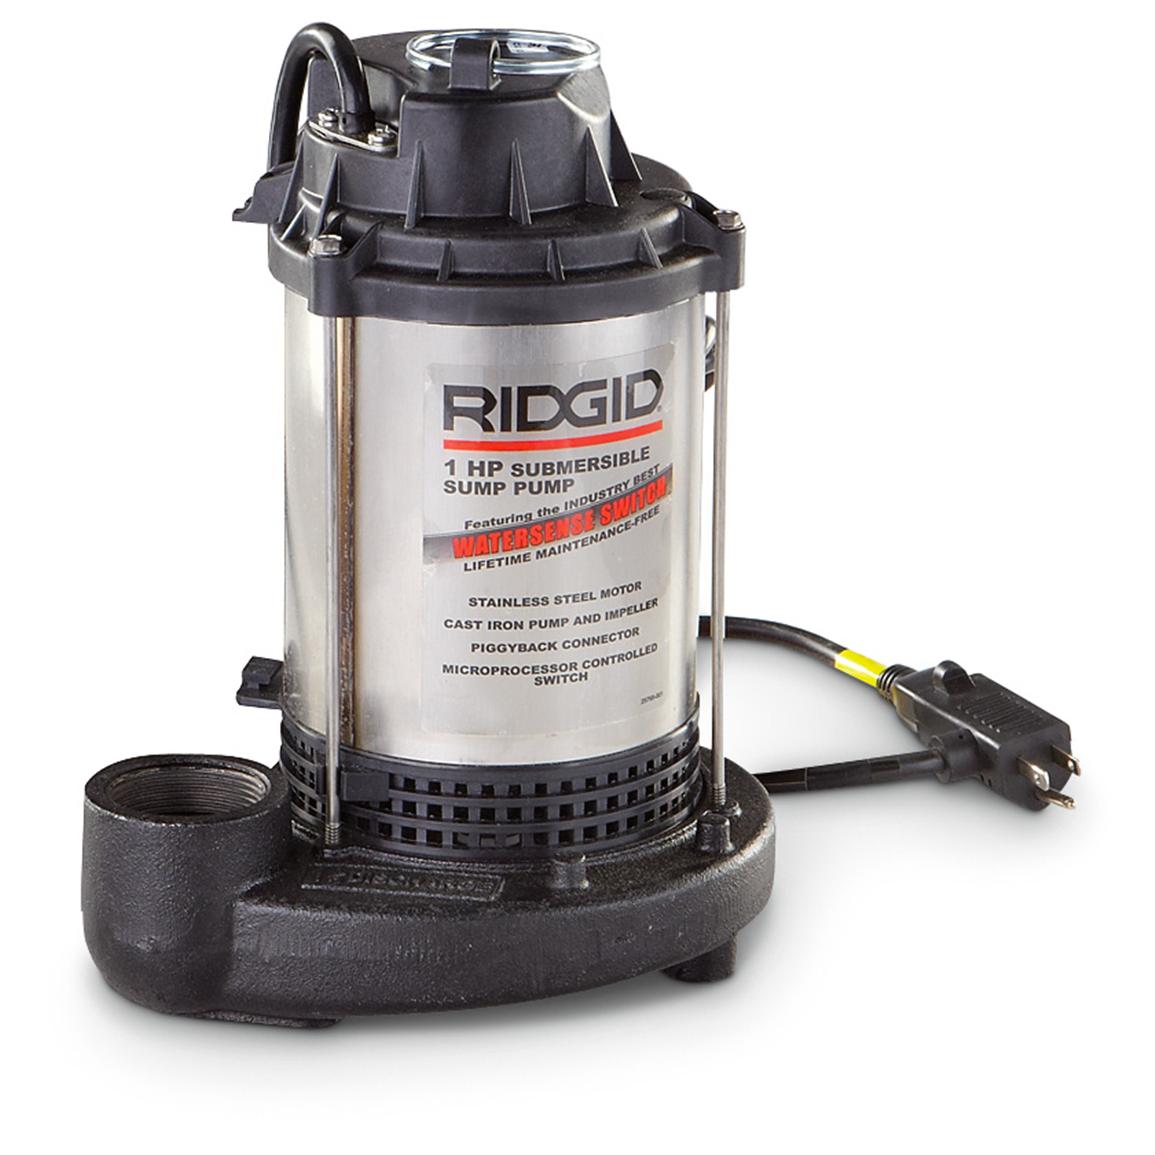 Ridgid® 1HP Submersible Sump Pump - 284959, Water Pumps at Sportsman&rsquo;s